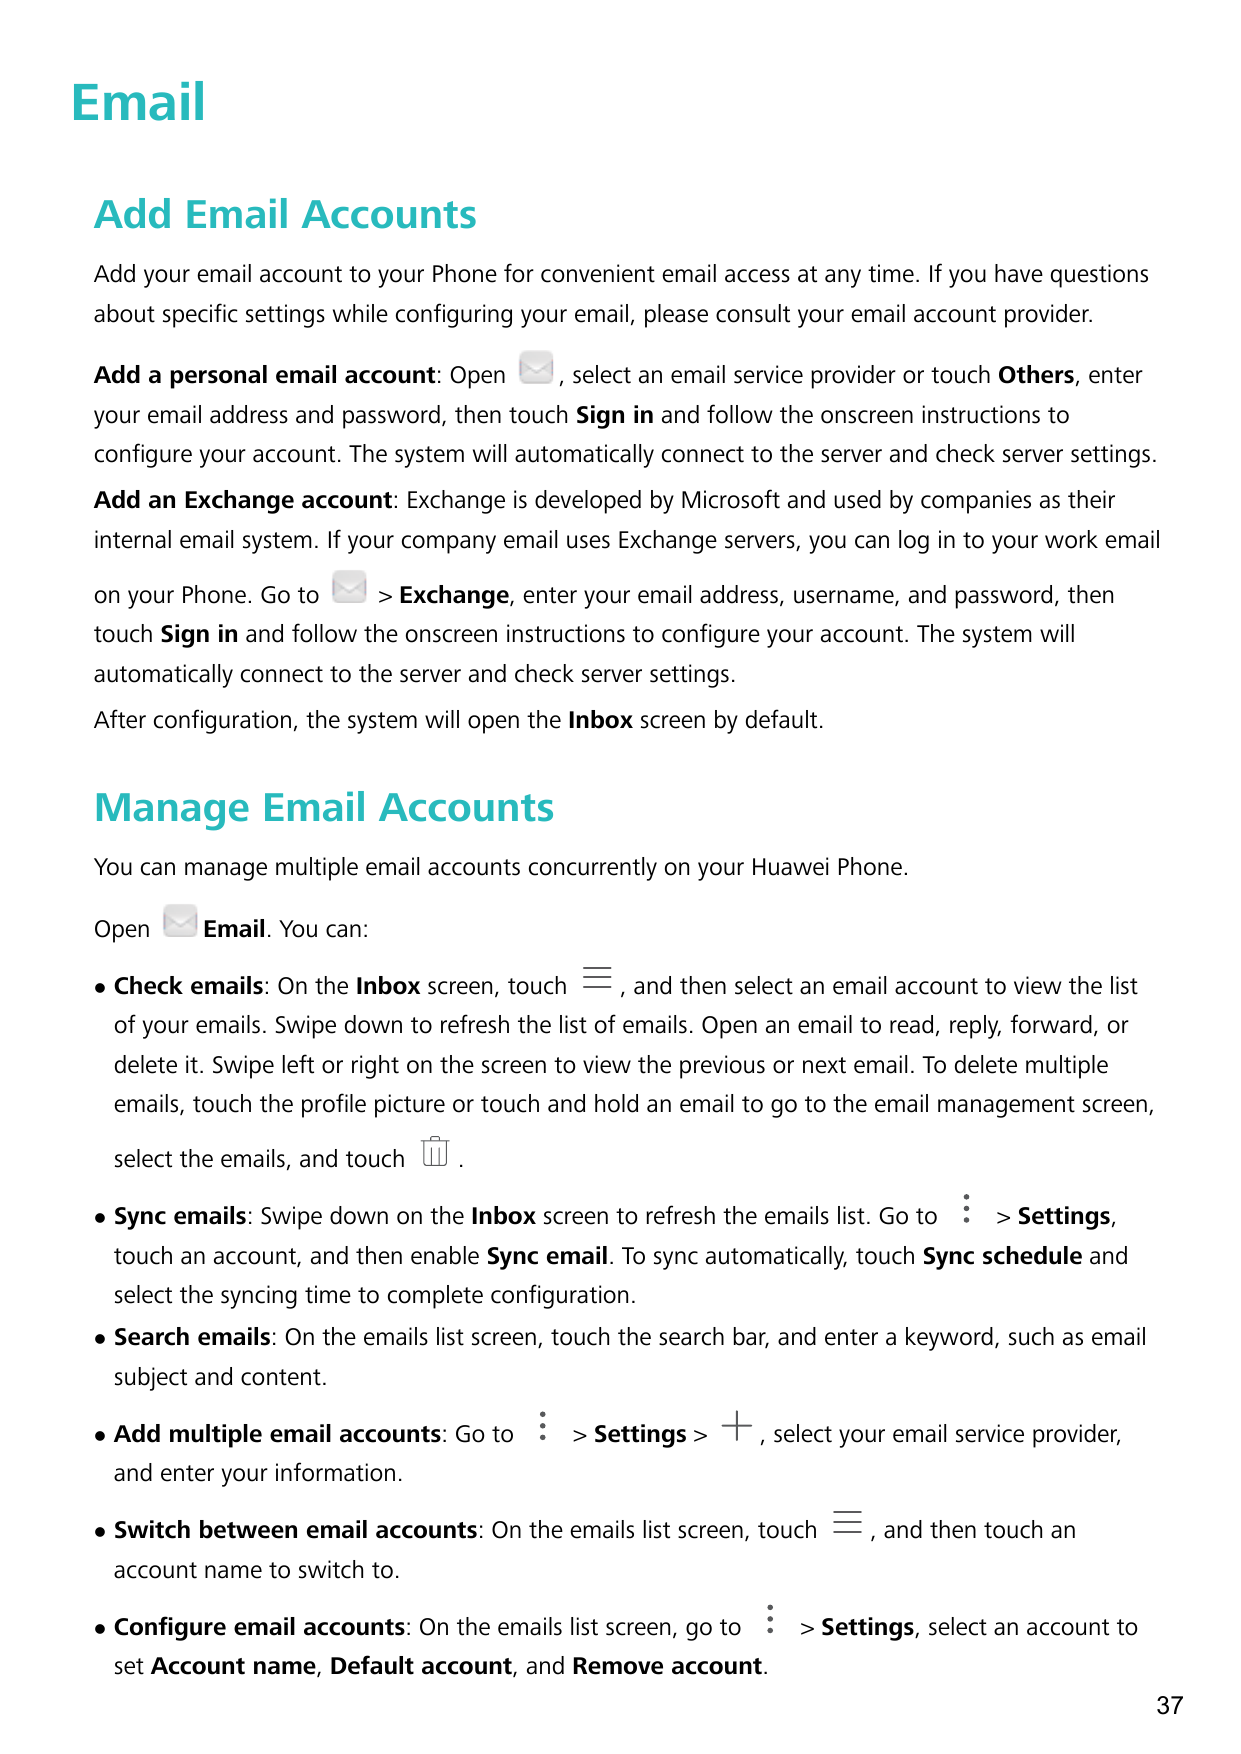 EmailAdd Email AccountsAdd your email account to your Phone for convenient email access at any time. If you have questionsabout 